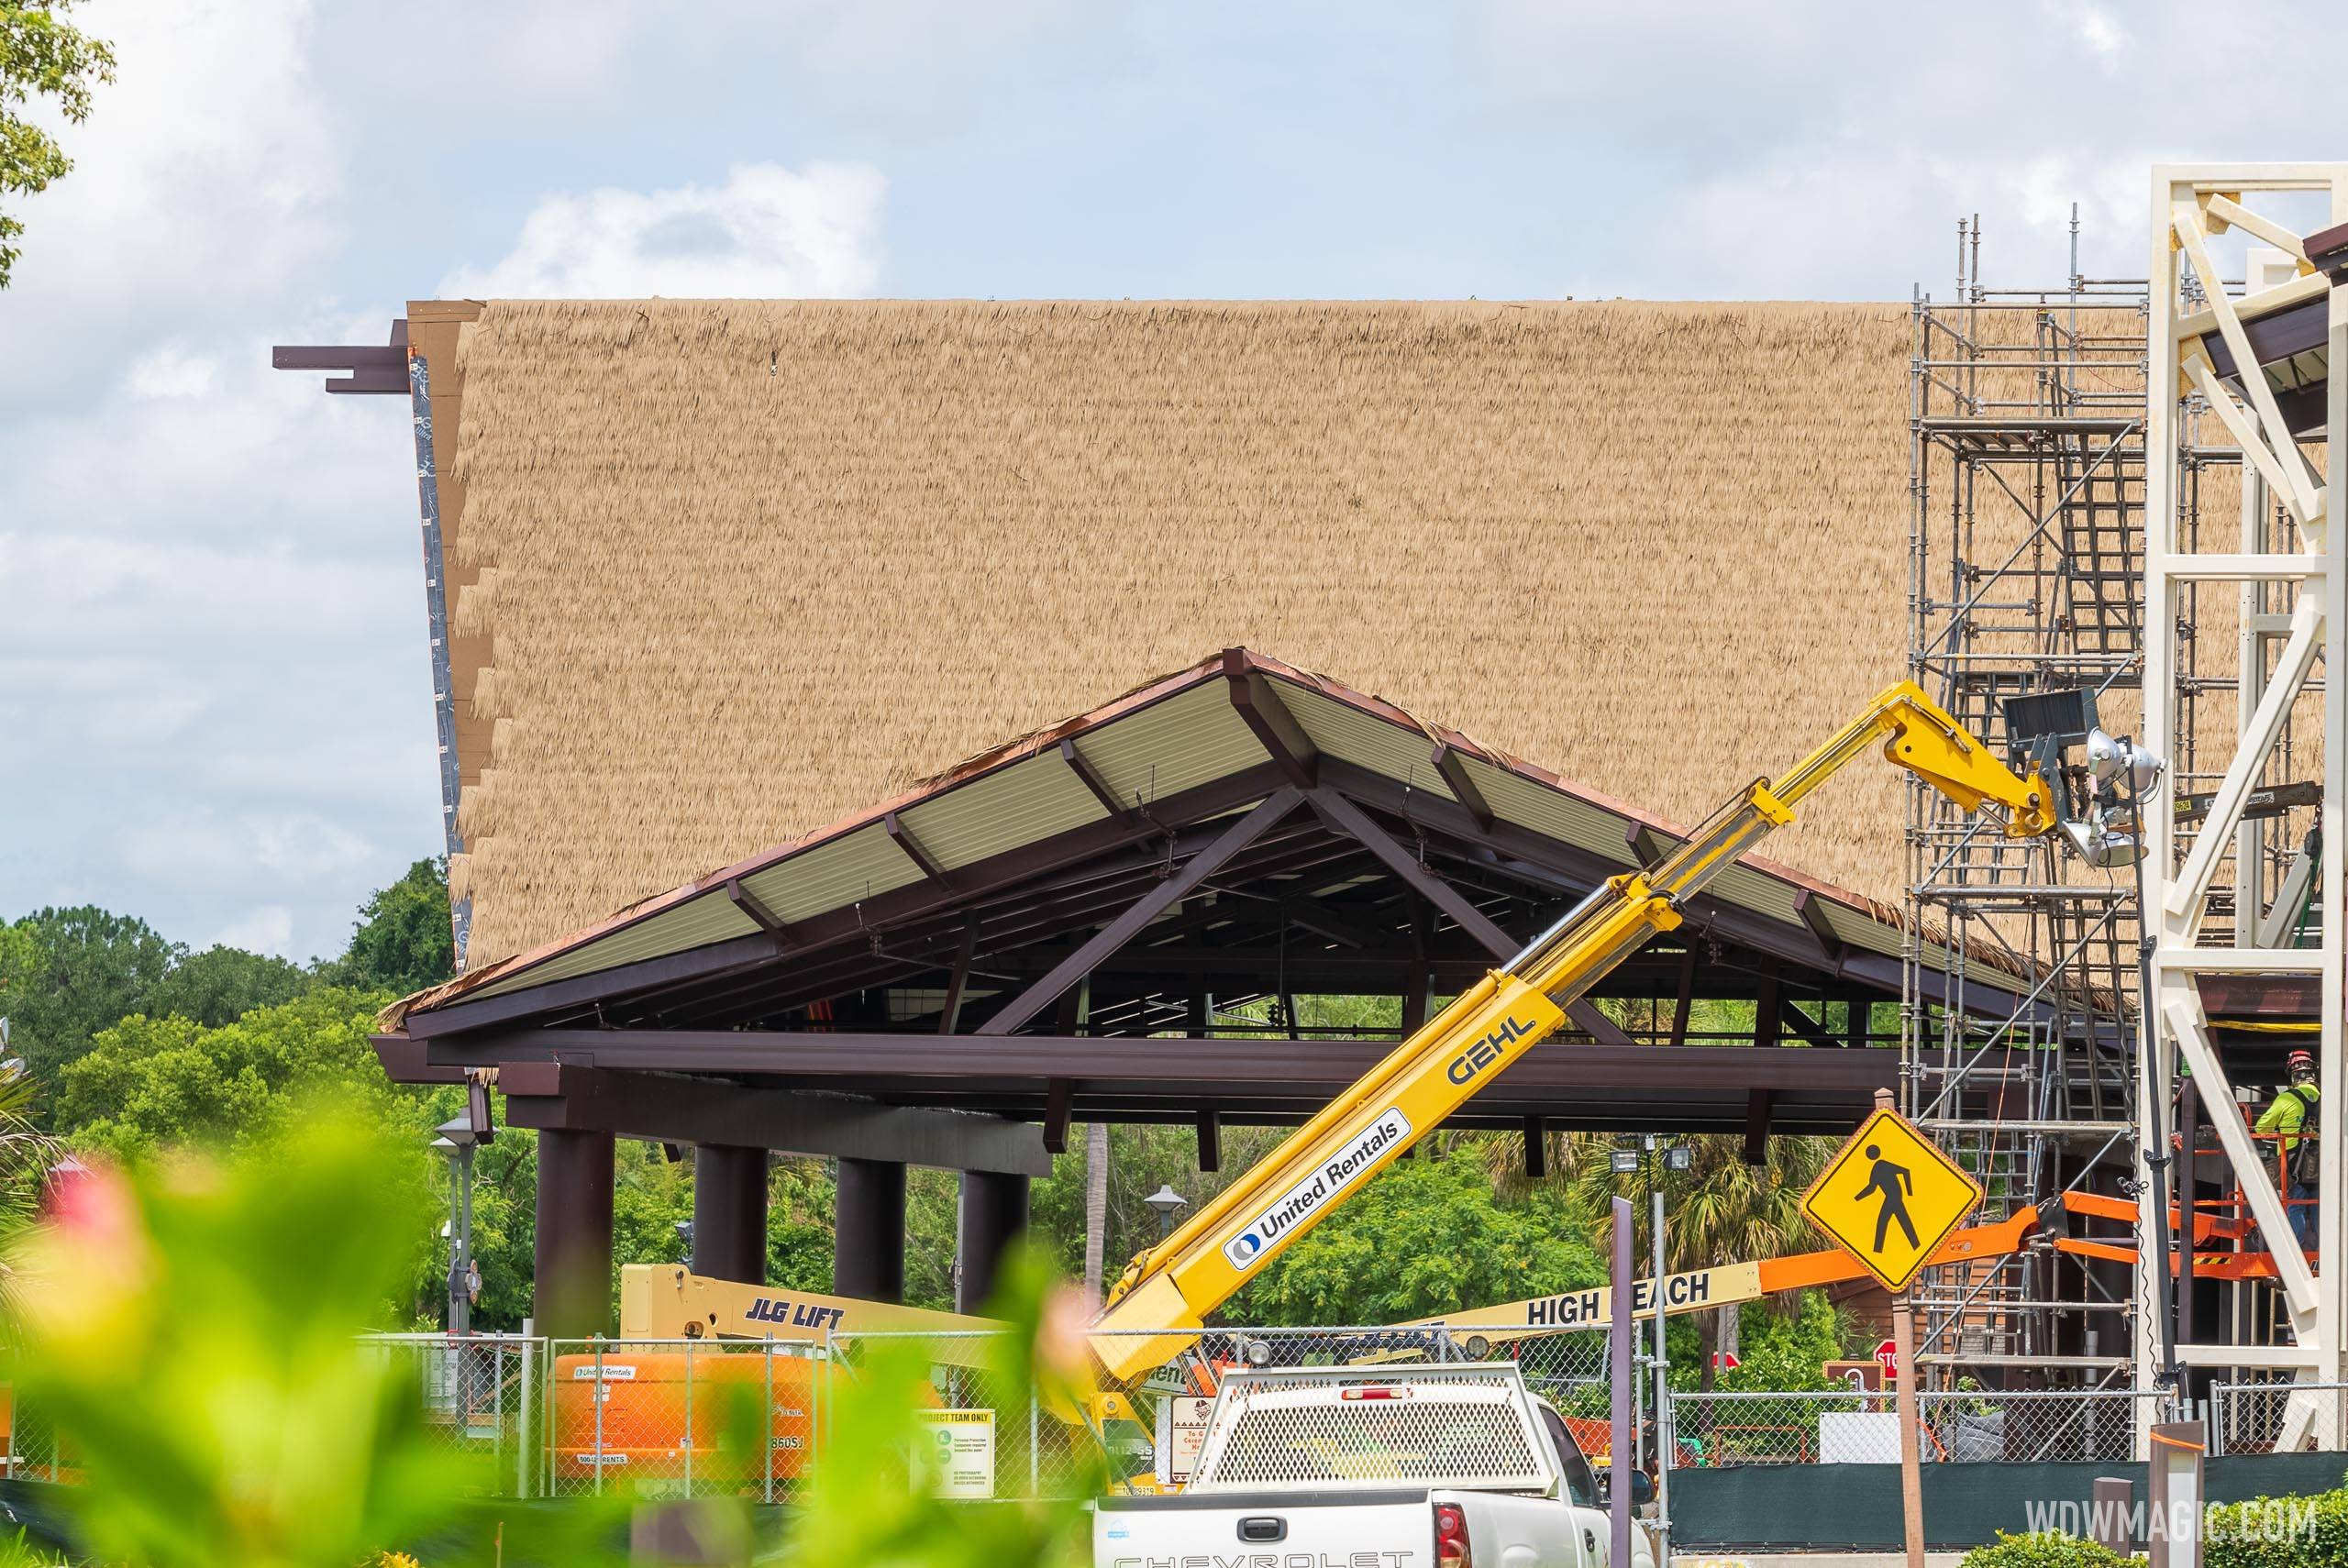 Thatched roof takes shape on the new porte-cochere at Disney's Polynesian Village Resort